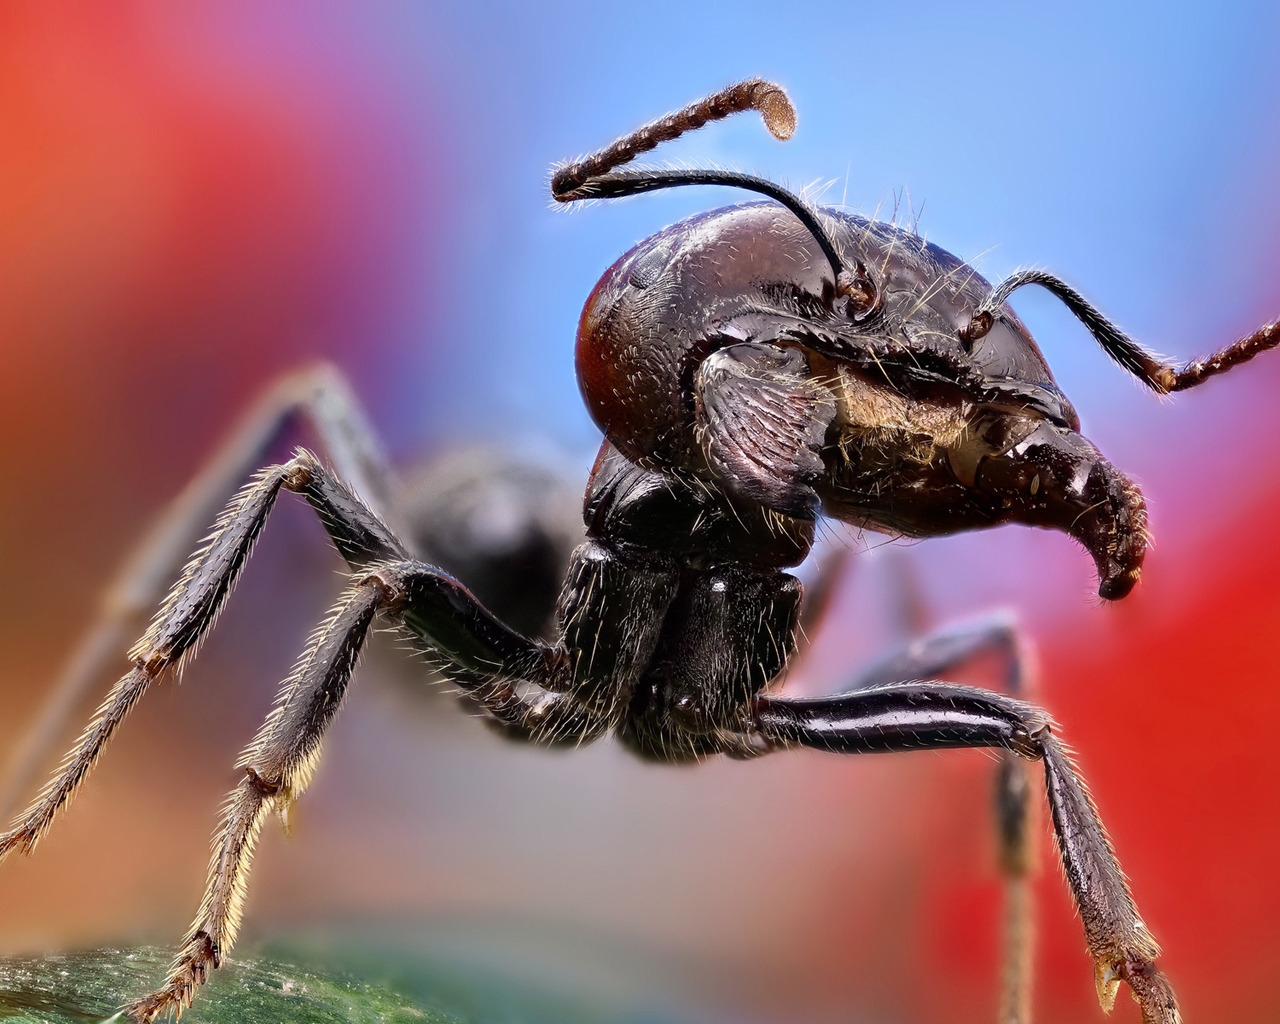 Ant Close Up for 1280 x 1024 resolution